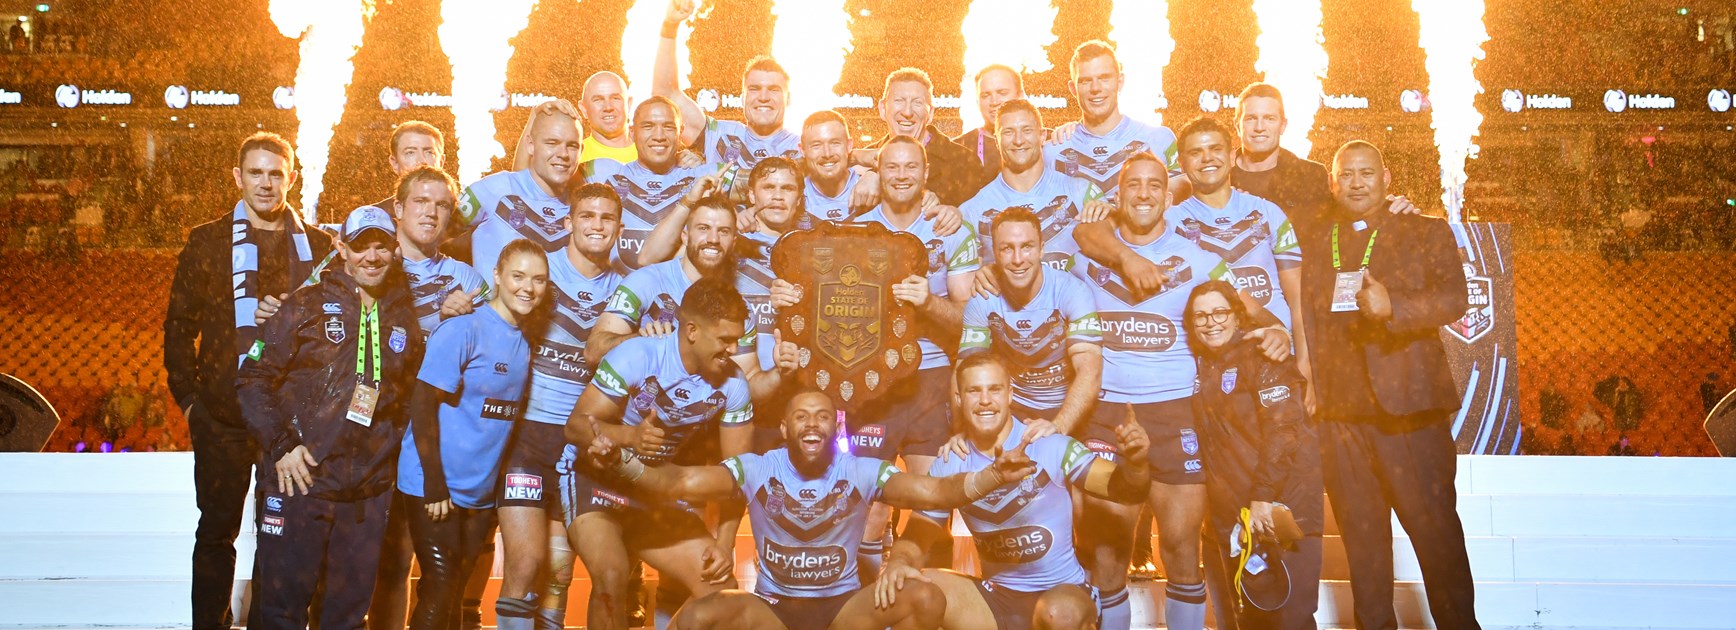 NSWRL named Organisation of the Year at NSW Sports Awards